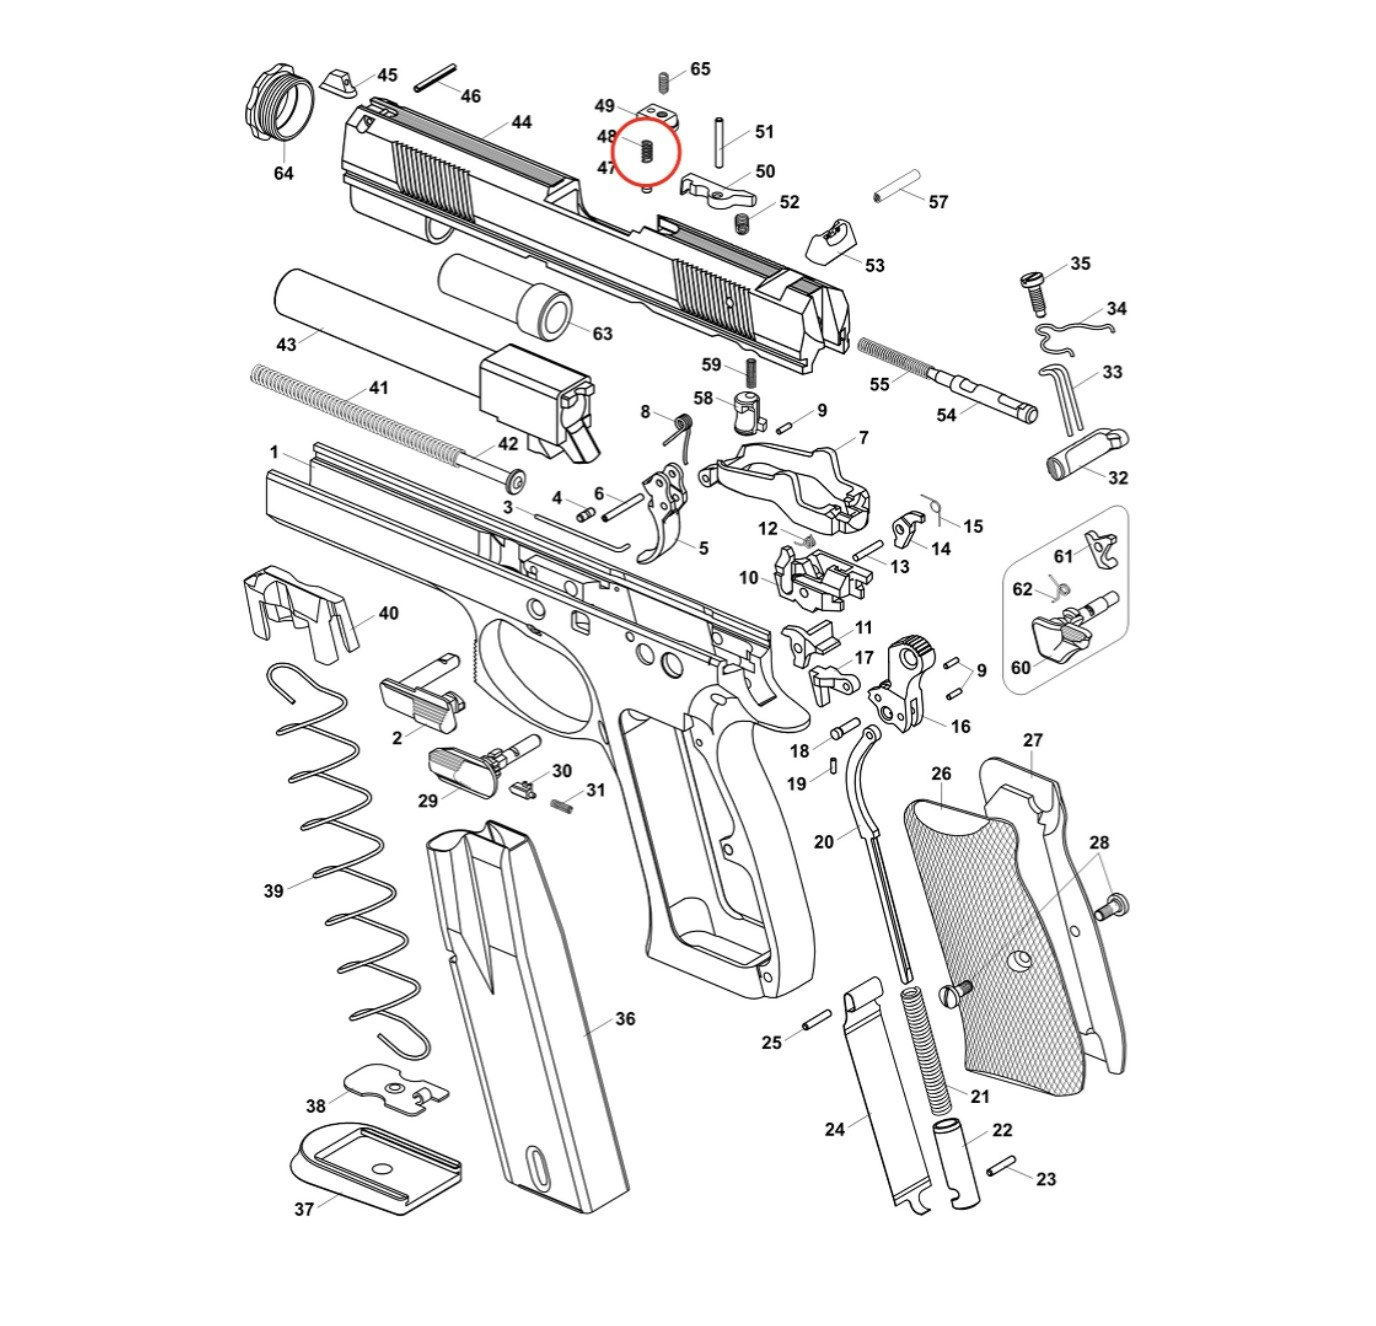 CZ - Spring for loaded chamber indicator - CZ 97